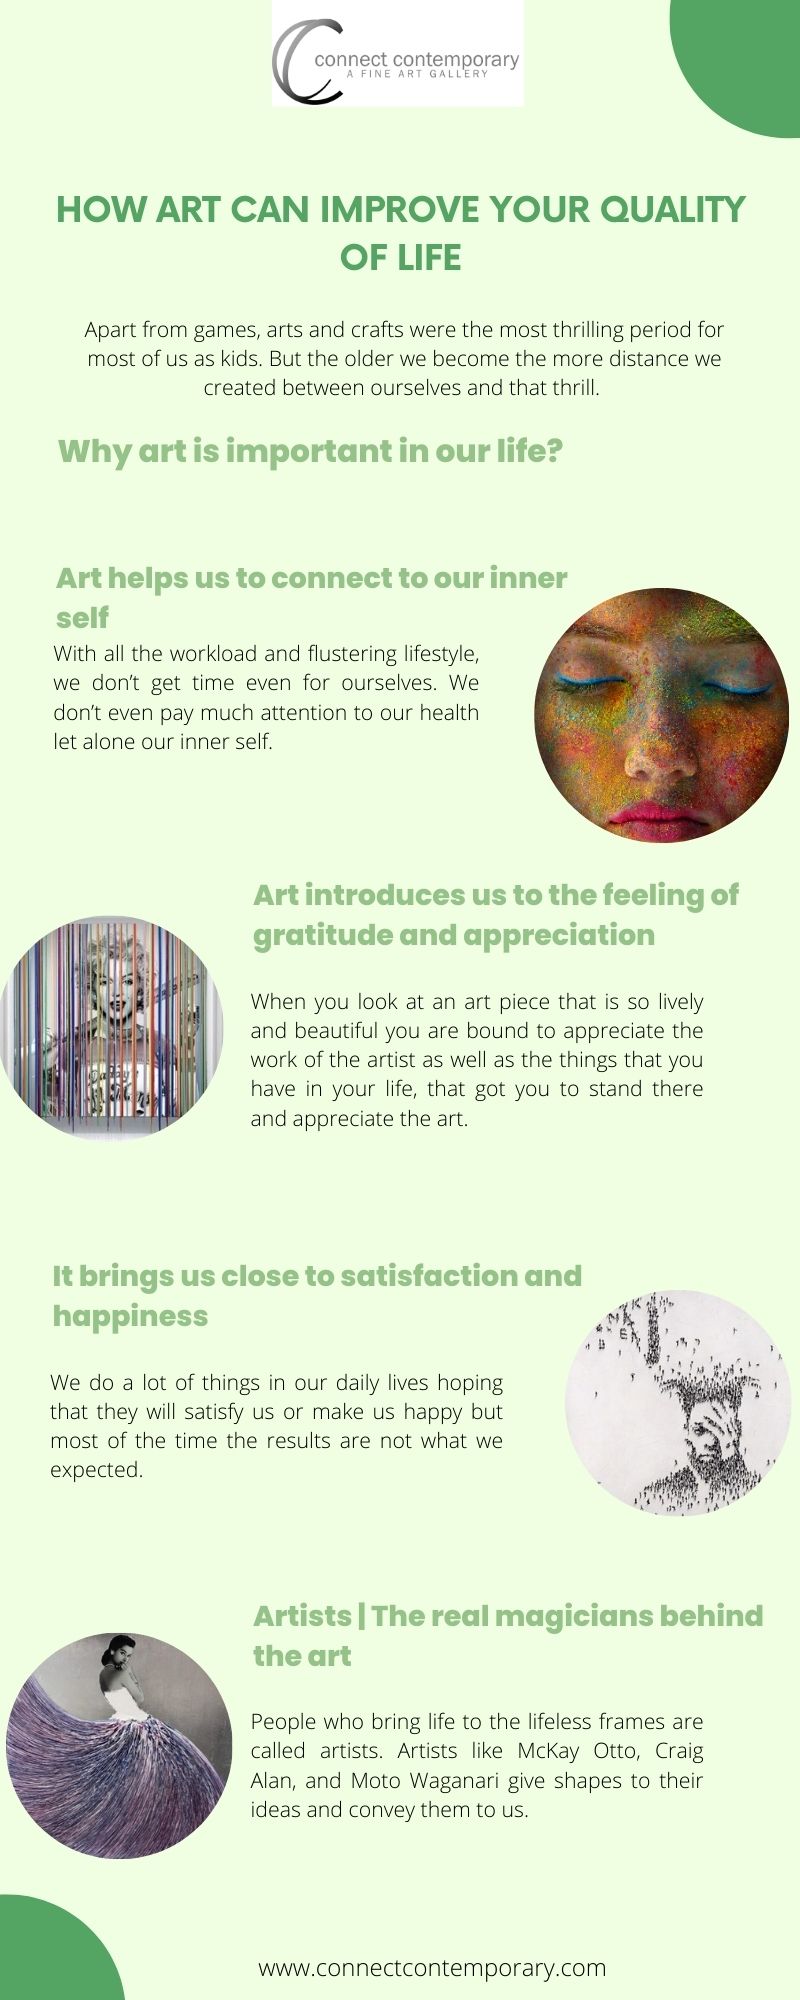 HOW ART CAN IMPROVE YOUR QUALITY OF LIFE